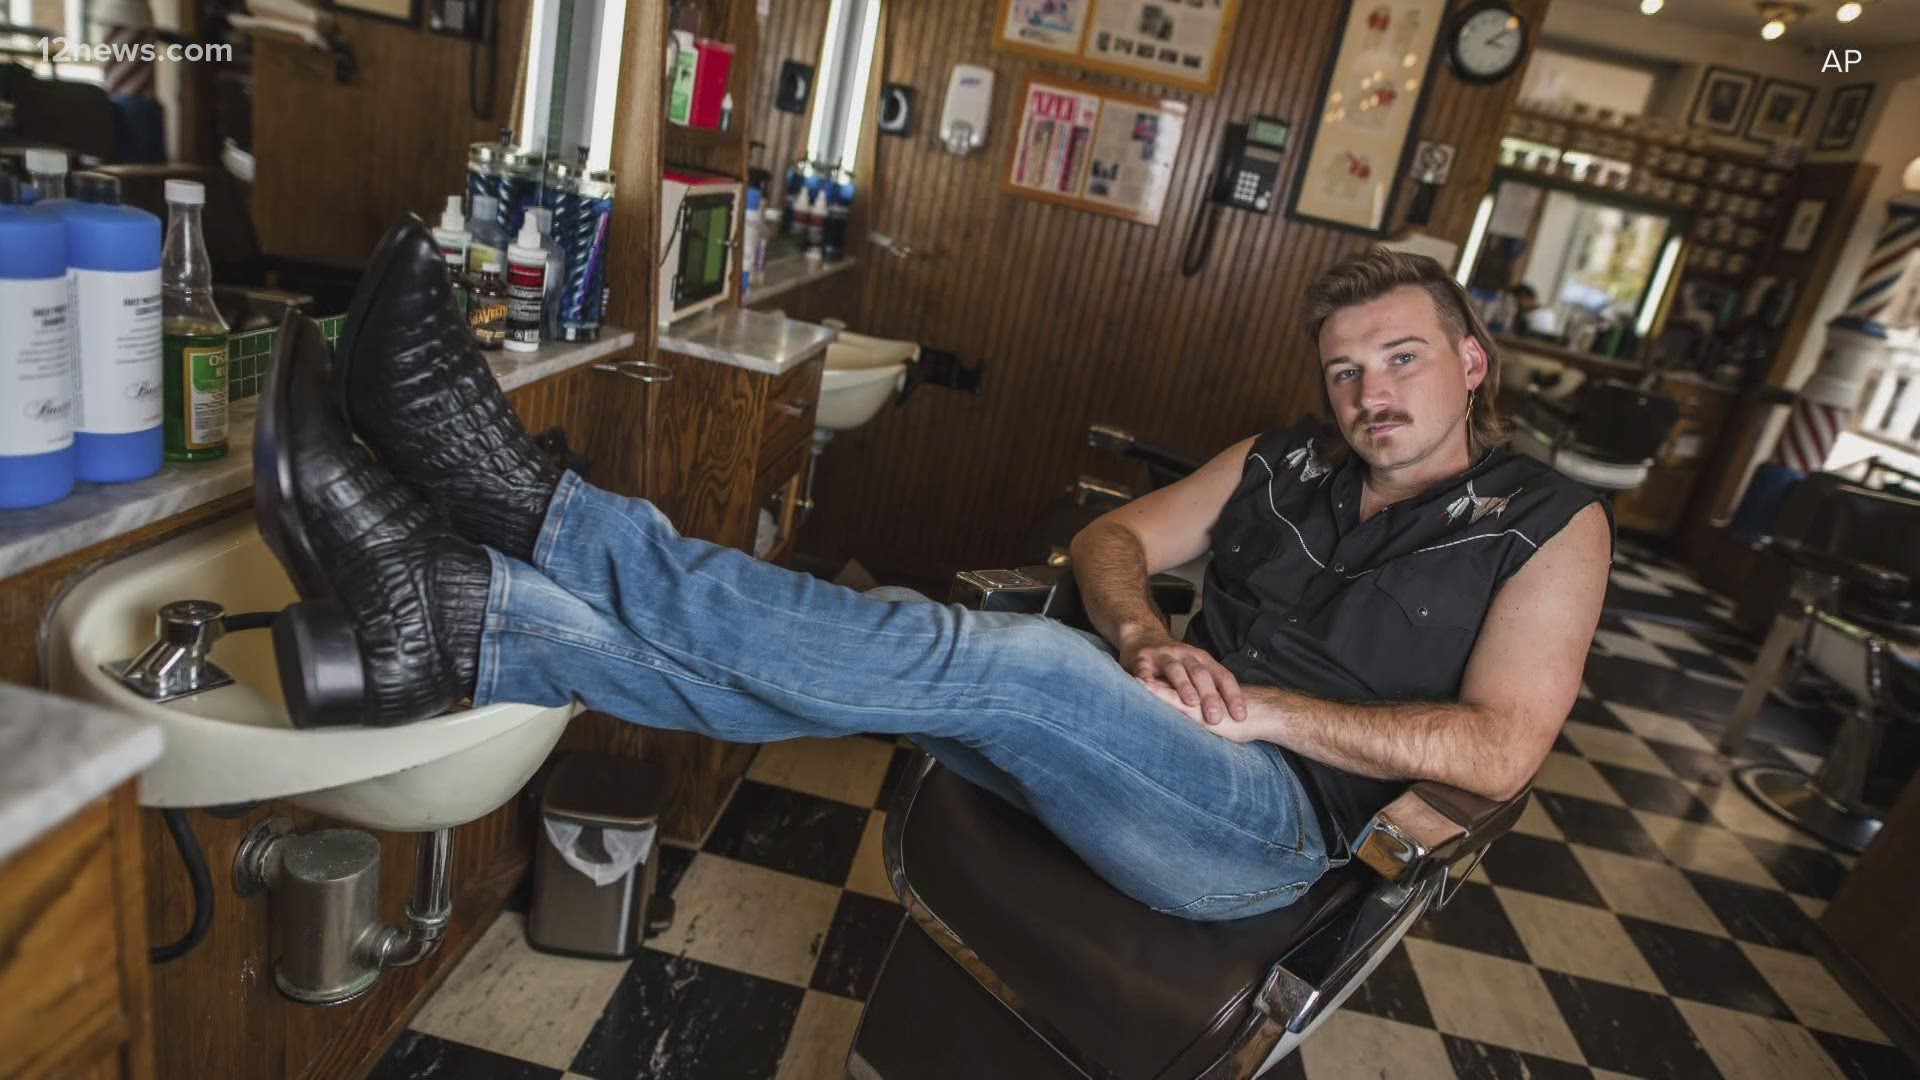 TMZ posted a video of country music star Morgan Wallen at his Nashville home referring to a friend of his a racial slur.